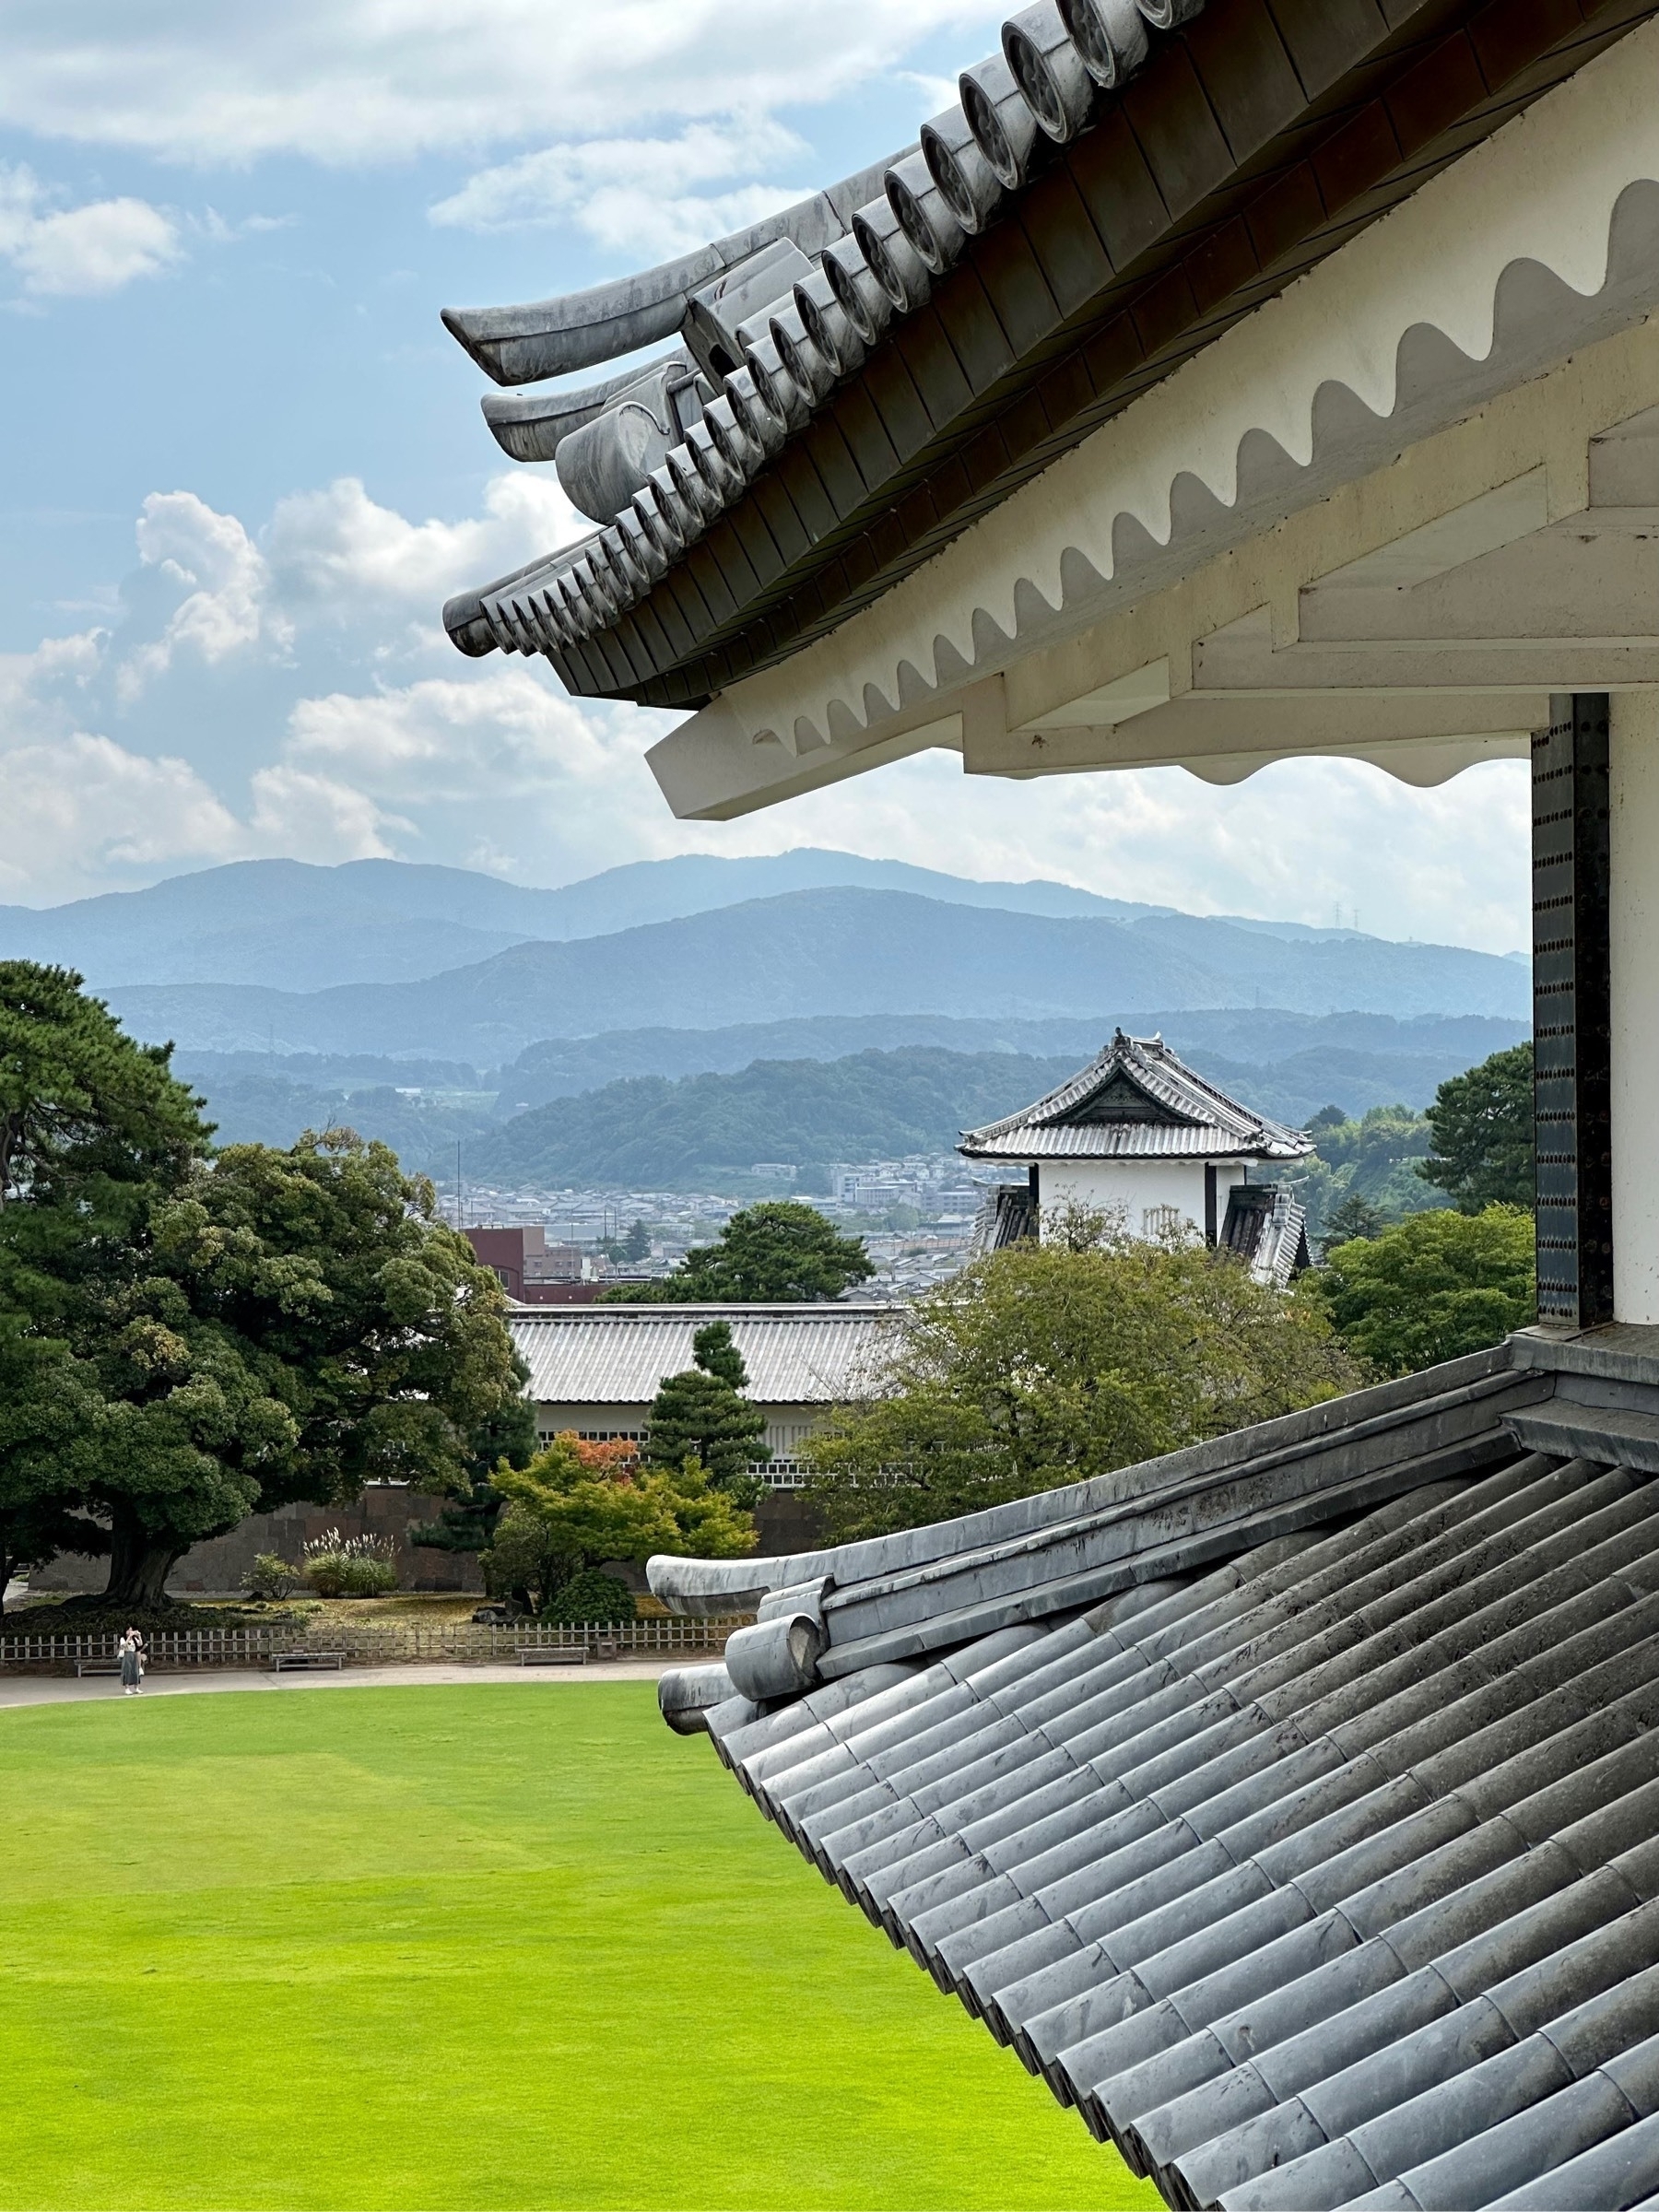 Several layers of misty mountains in the distance, taken from between two roofs of a Japanese castle, a cloudy sky above, and an almost luminous-green field of grass below